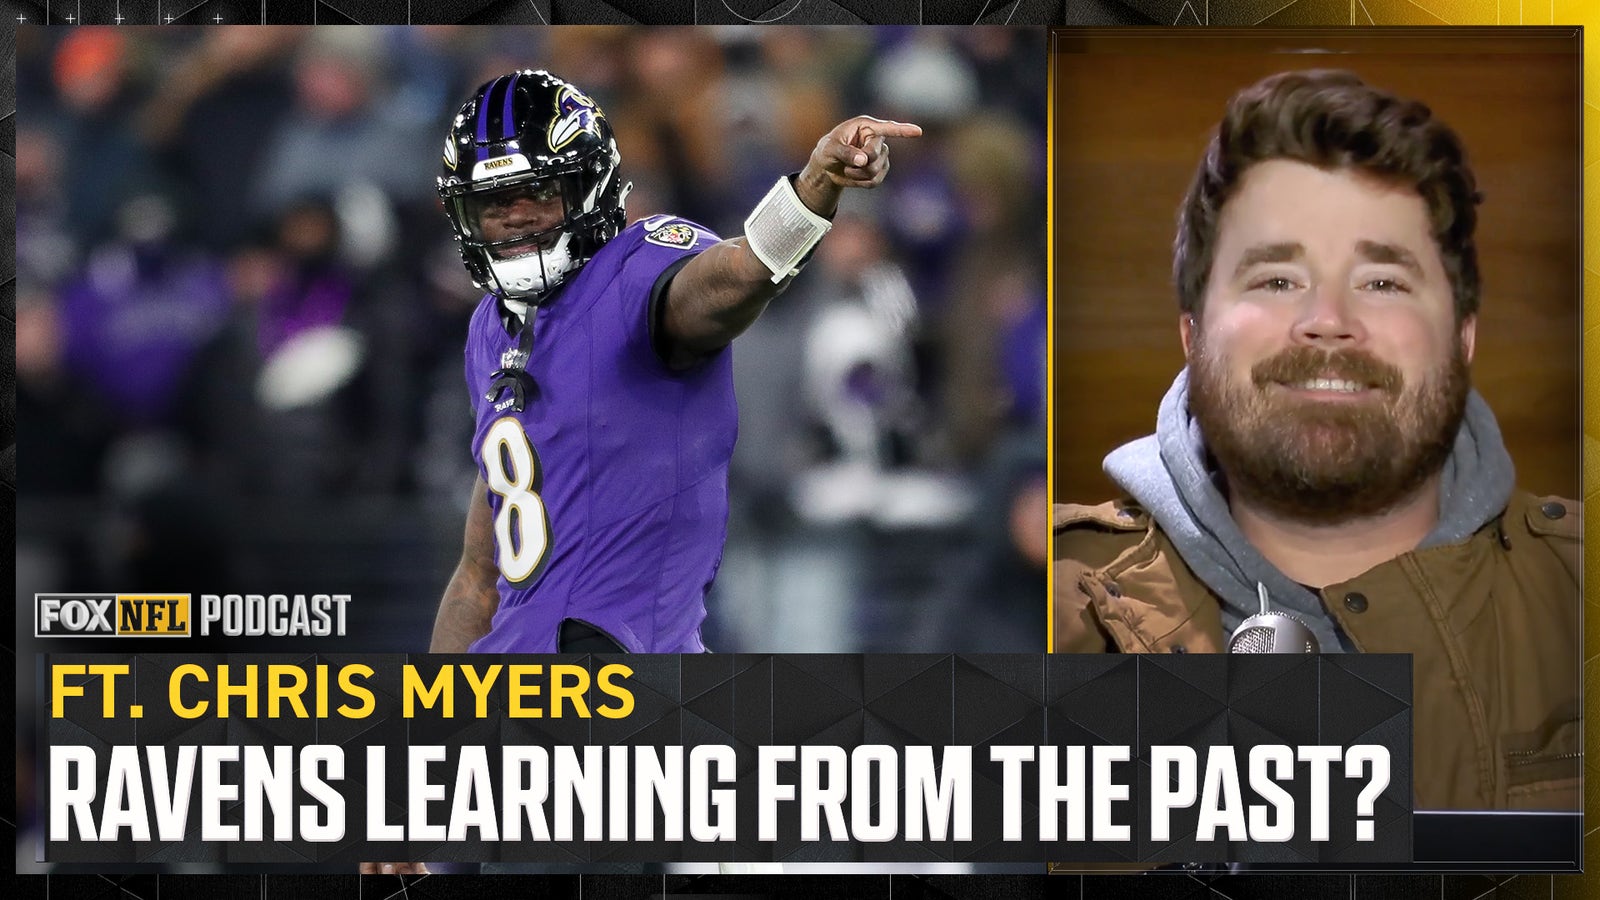 Have Lamar Jackson, Ravens finally solved their playoff woes? 